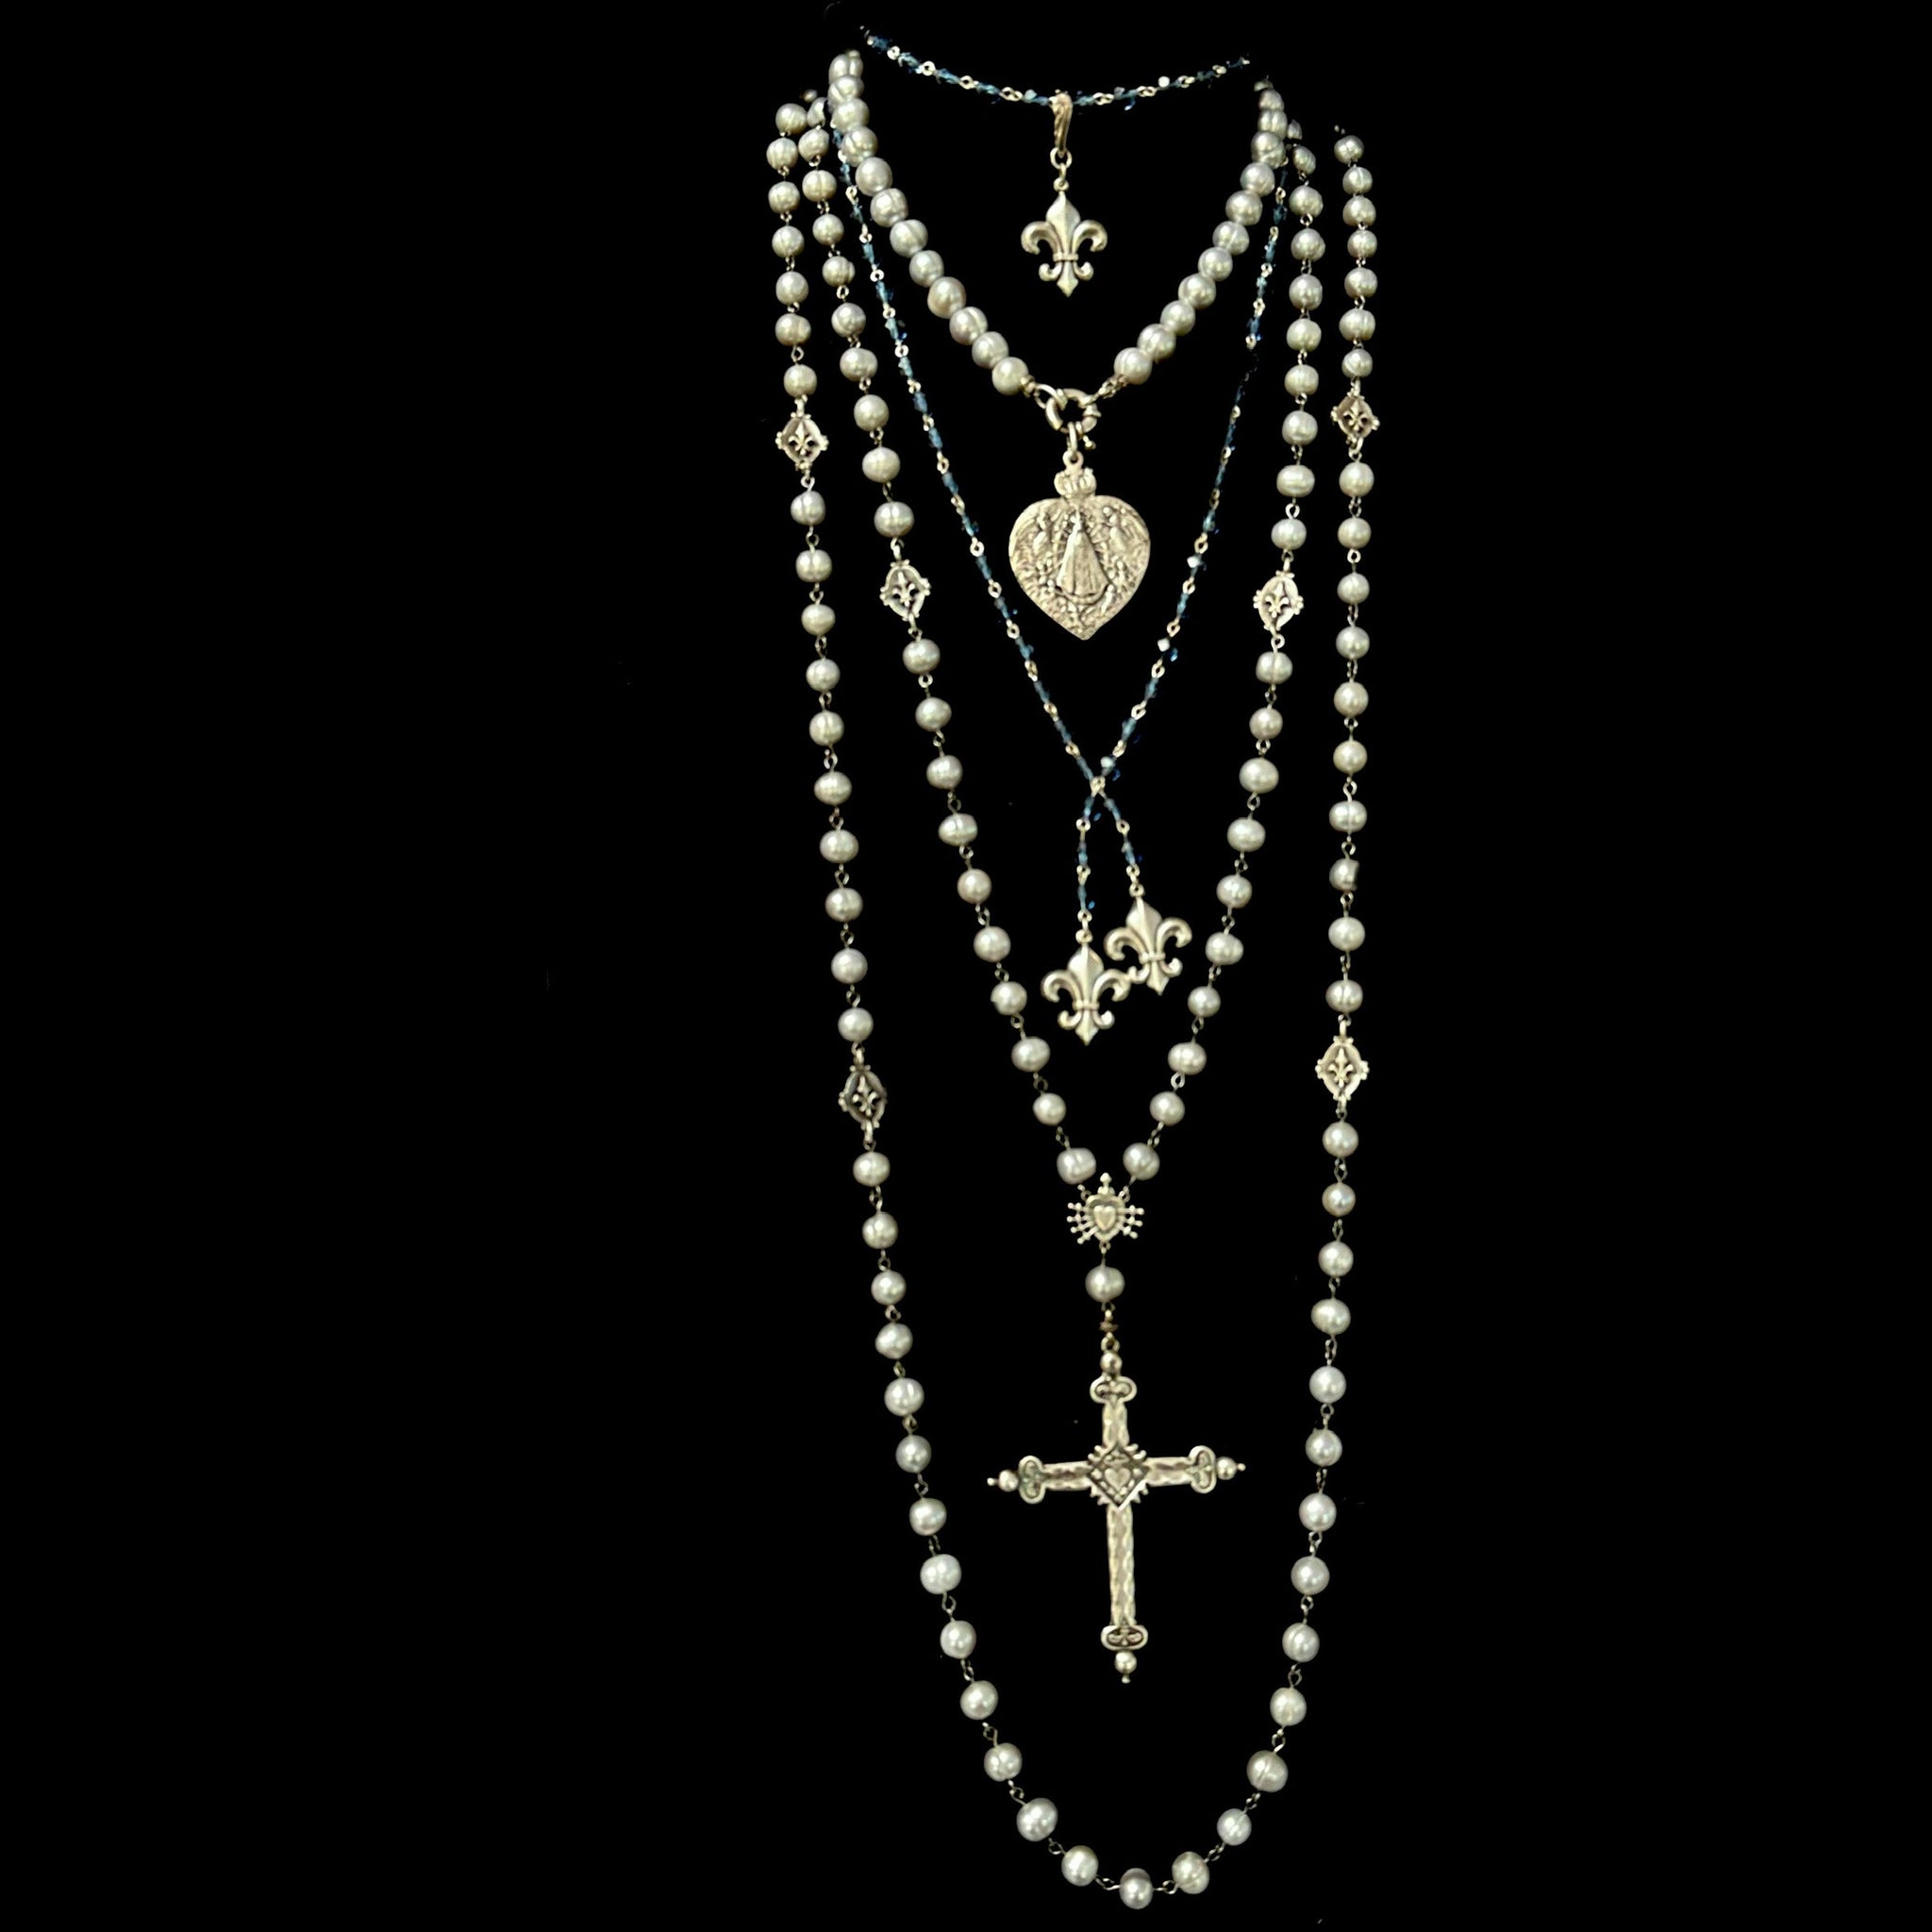 Buy BEST SELLER Pearl Rosary Necklace Women Gold Rosary Necklaces Catholic  Jewelry Plain Cross Confirmation Anniversary Gift, Miraculous Online in  India - Etsy